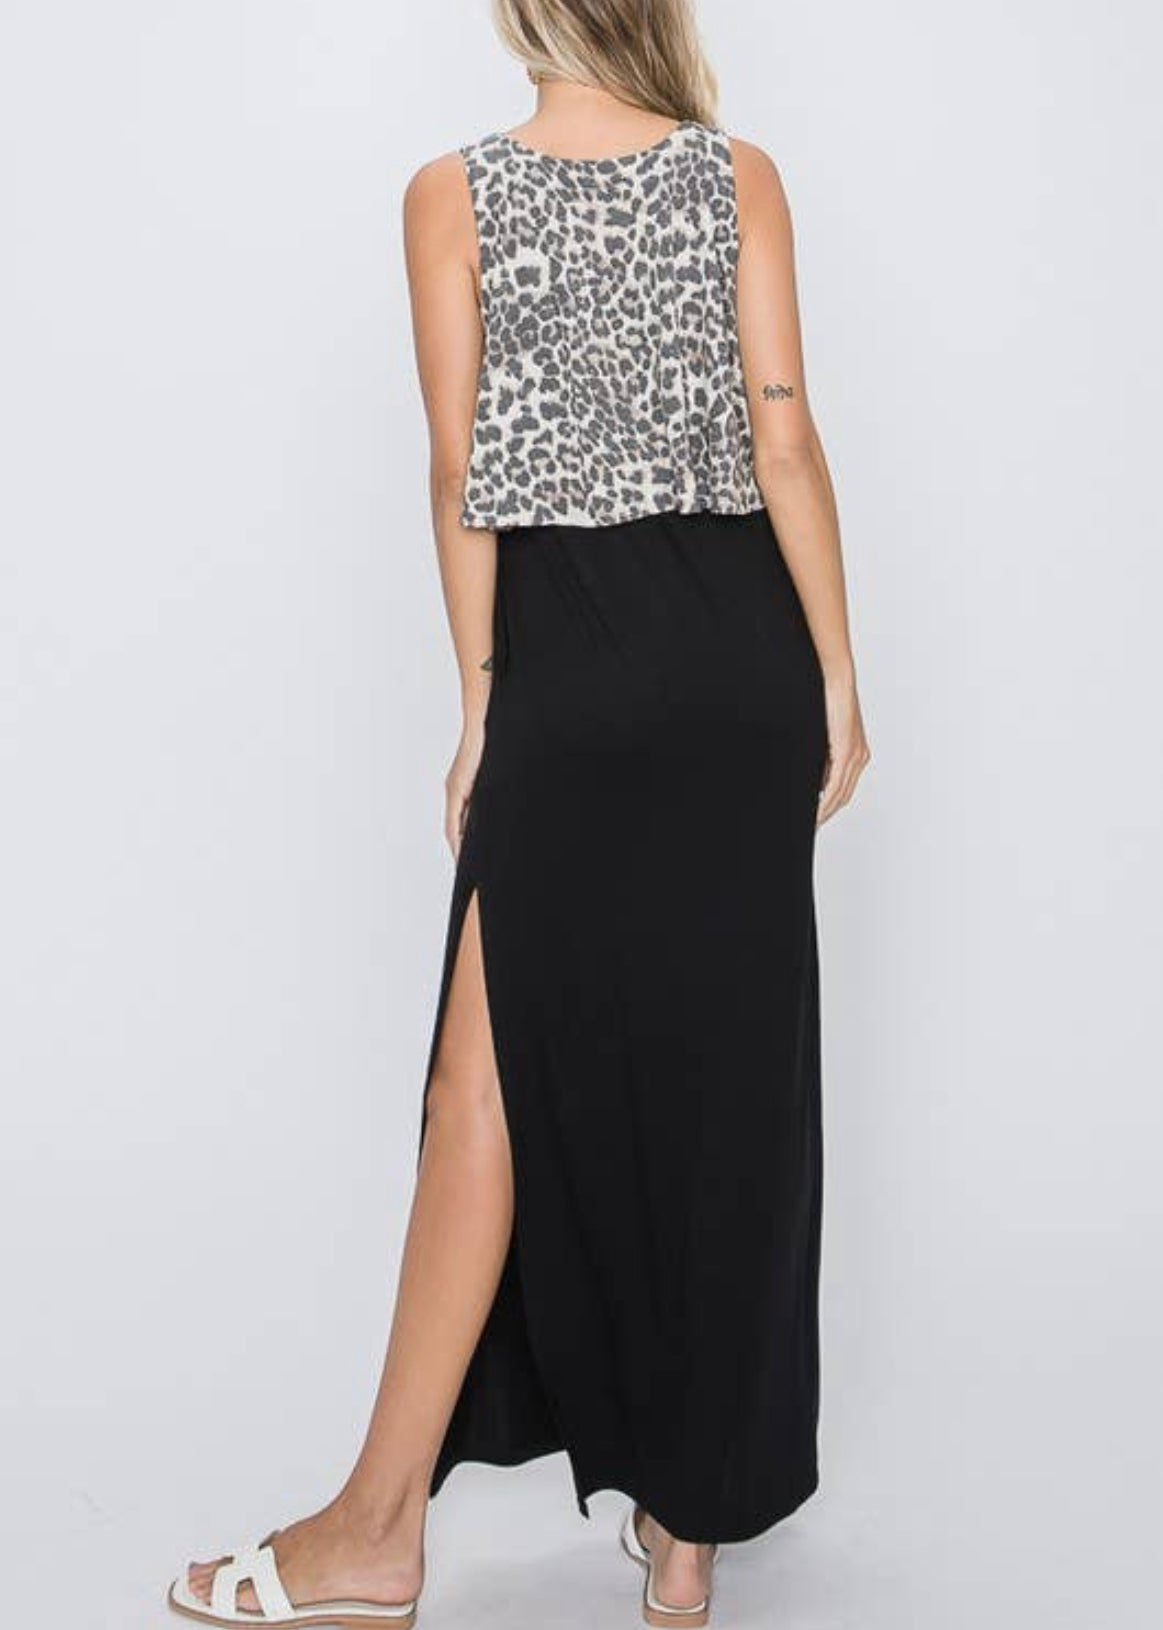 Animal and solid maxi dress